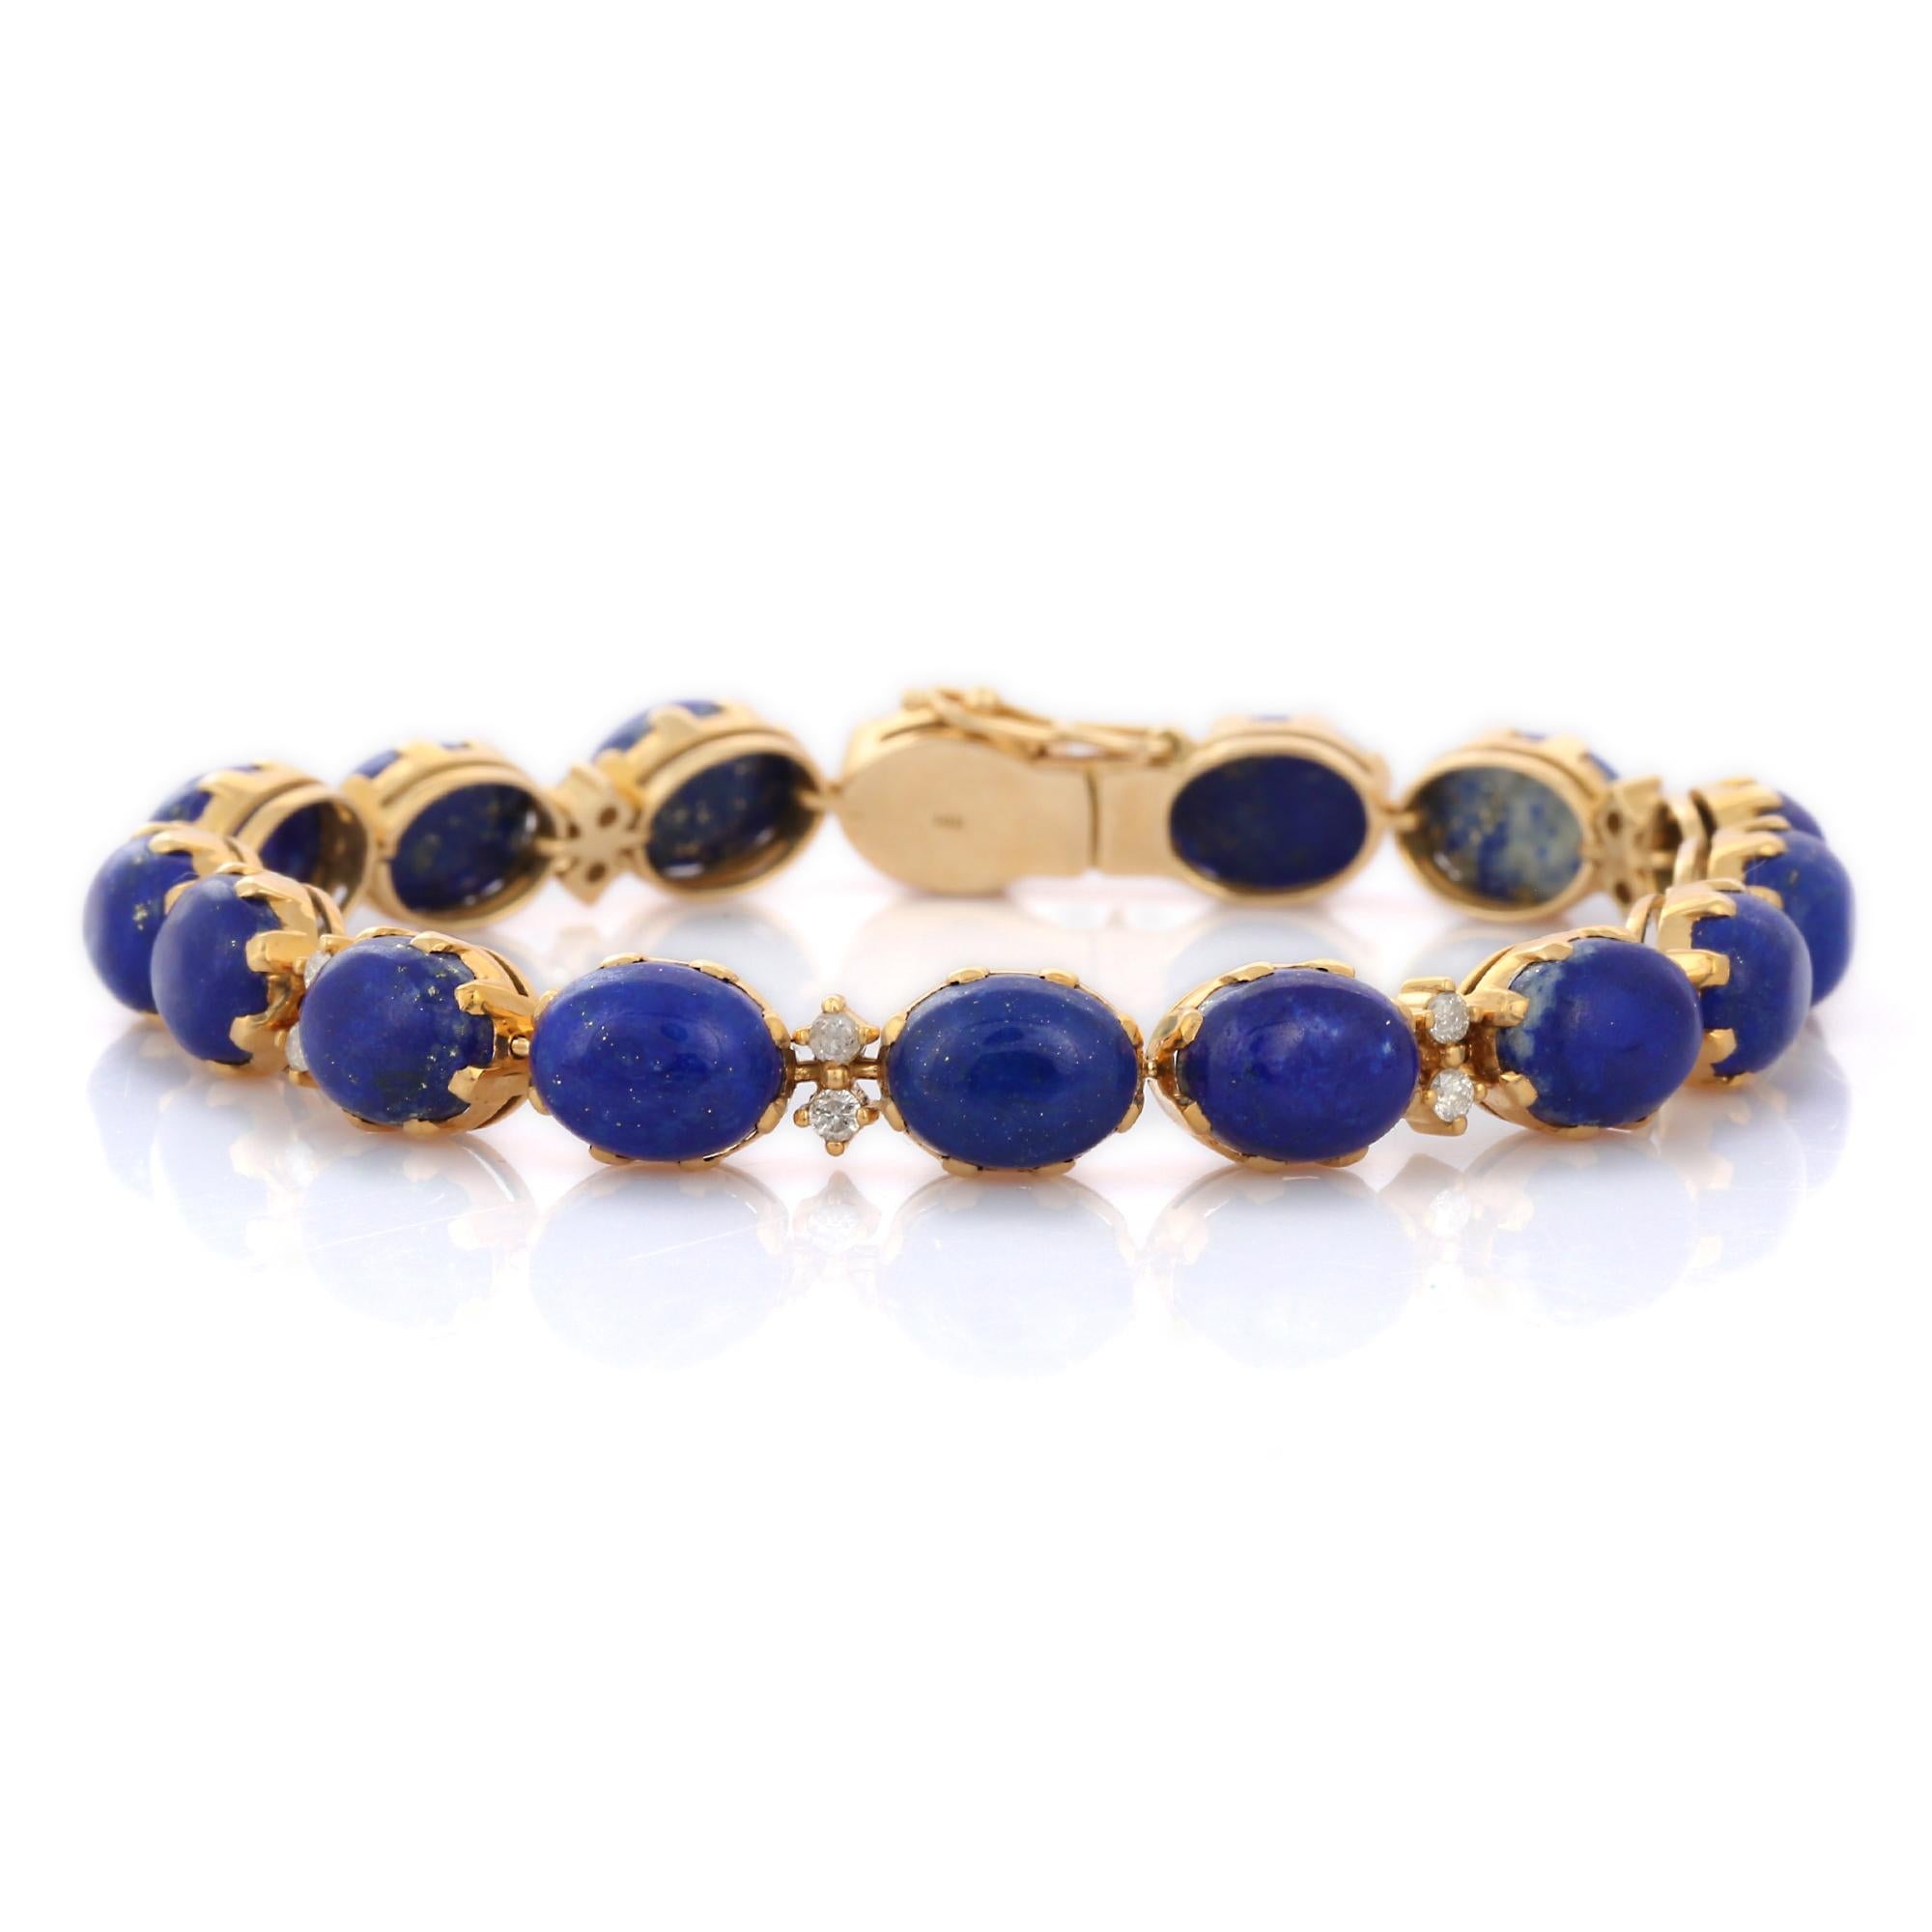 Lapis Lazuli bracelet in 14K Gold. It has a perfect oval cut gemstone and diamonds to make you stand out on any occasion or an event. Bracelets are worn to enhance the look. Women love to look good. It is common to see a woman rocking a lovely gold